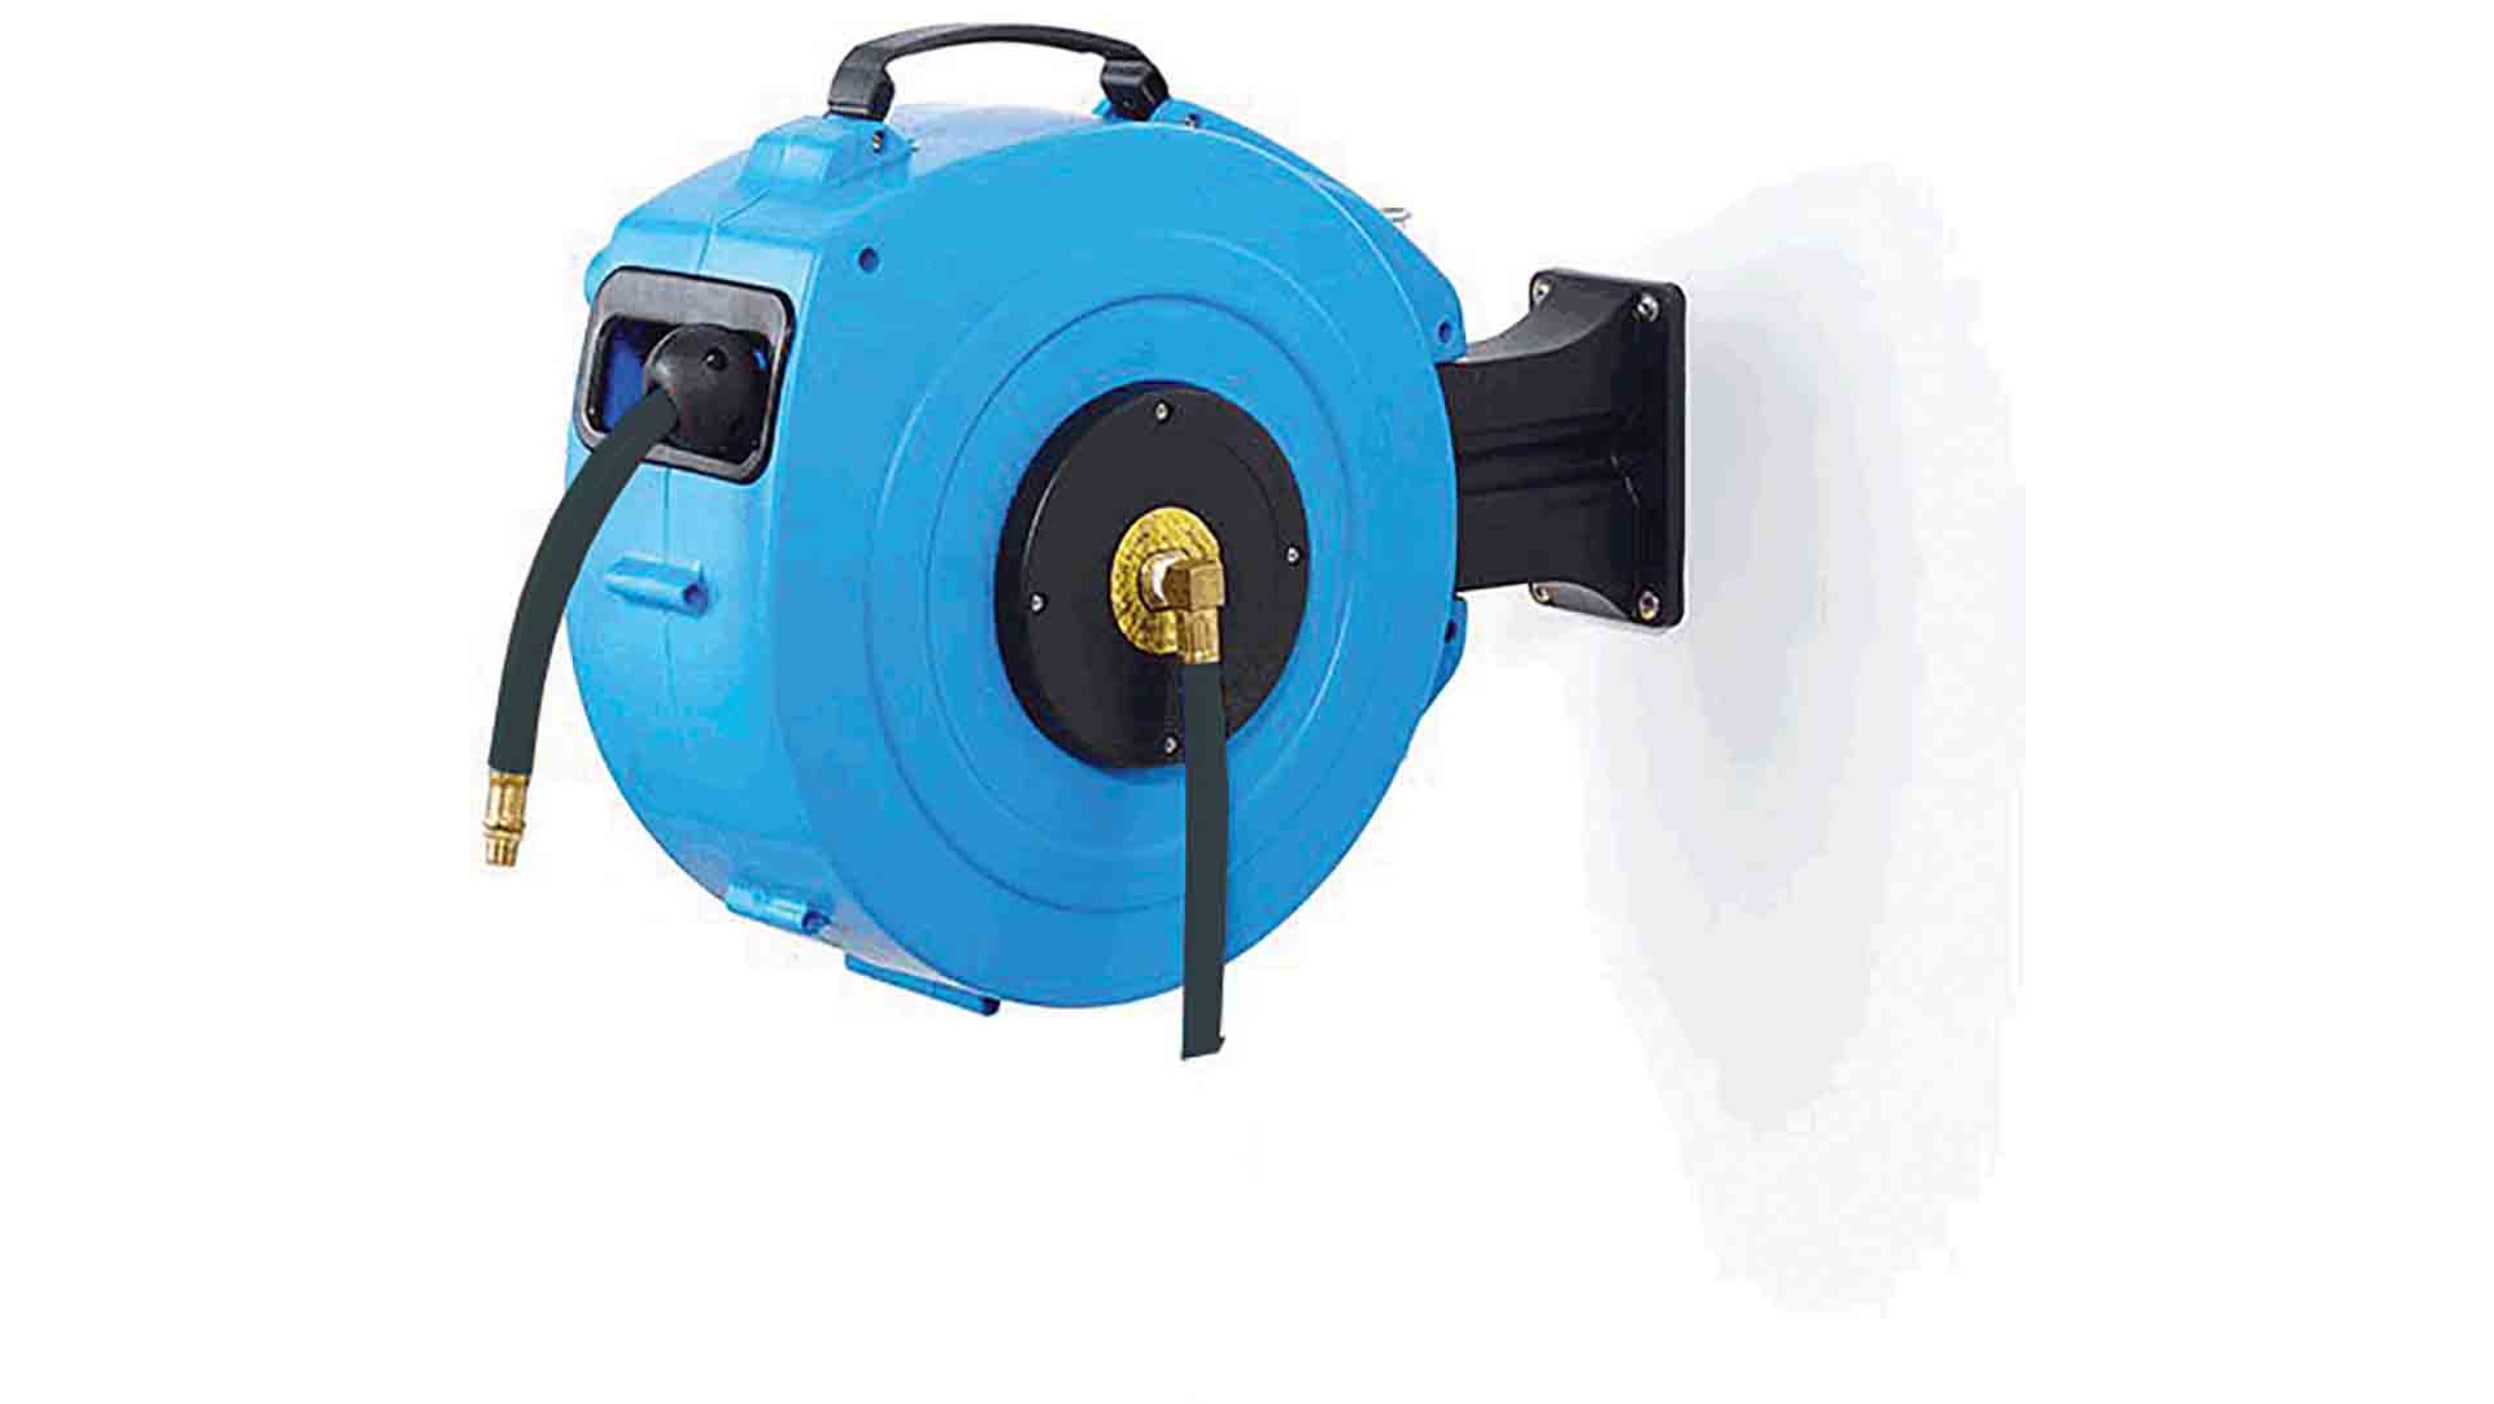 10M 3in1 Combined Retractable Hose Reel Box (Air + Electric + Water) Hose  Reel Agriculture & Gardening Kuala Lumpur (KL), Malaysia, Selangor, Setapak  Supplier, Suppliers, Supply, Supplies